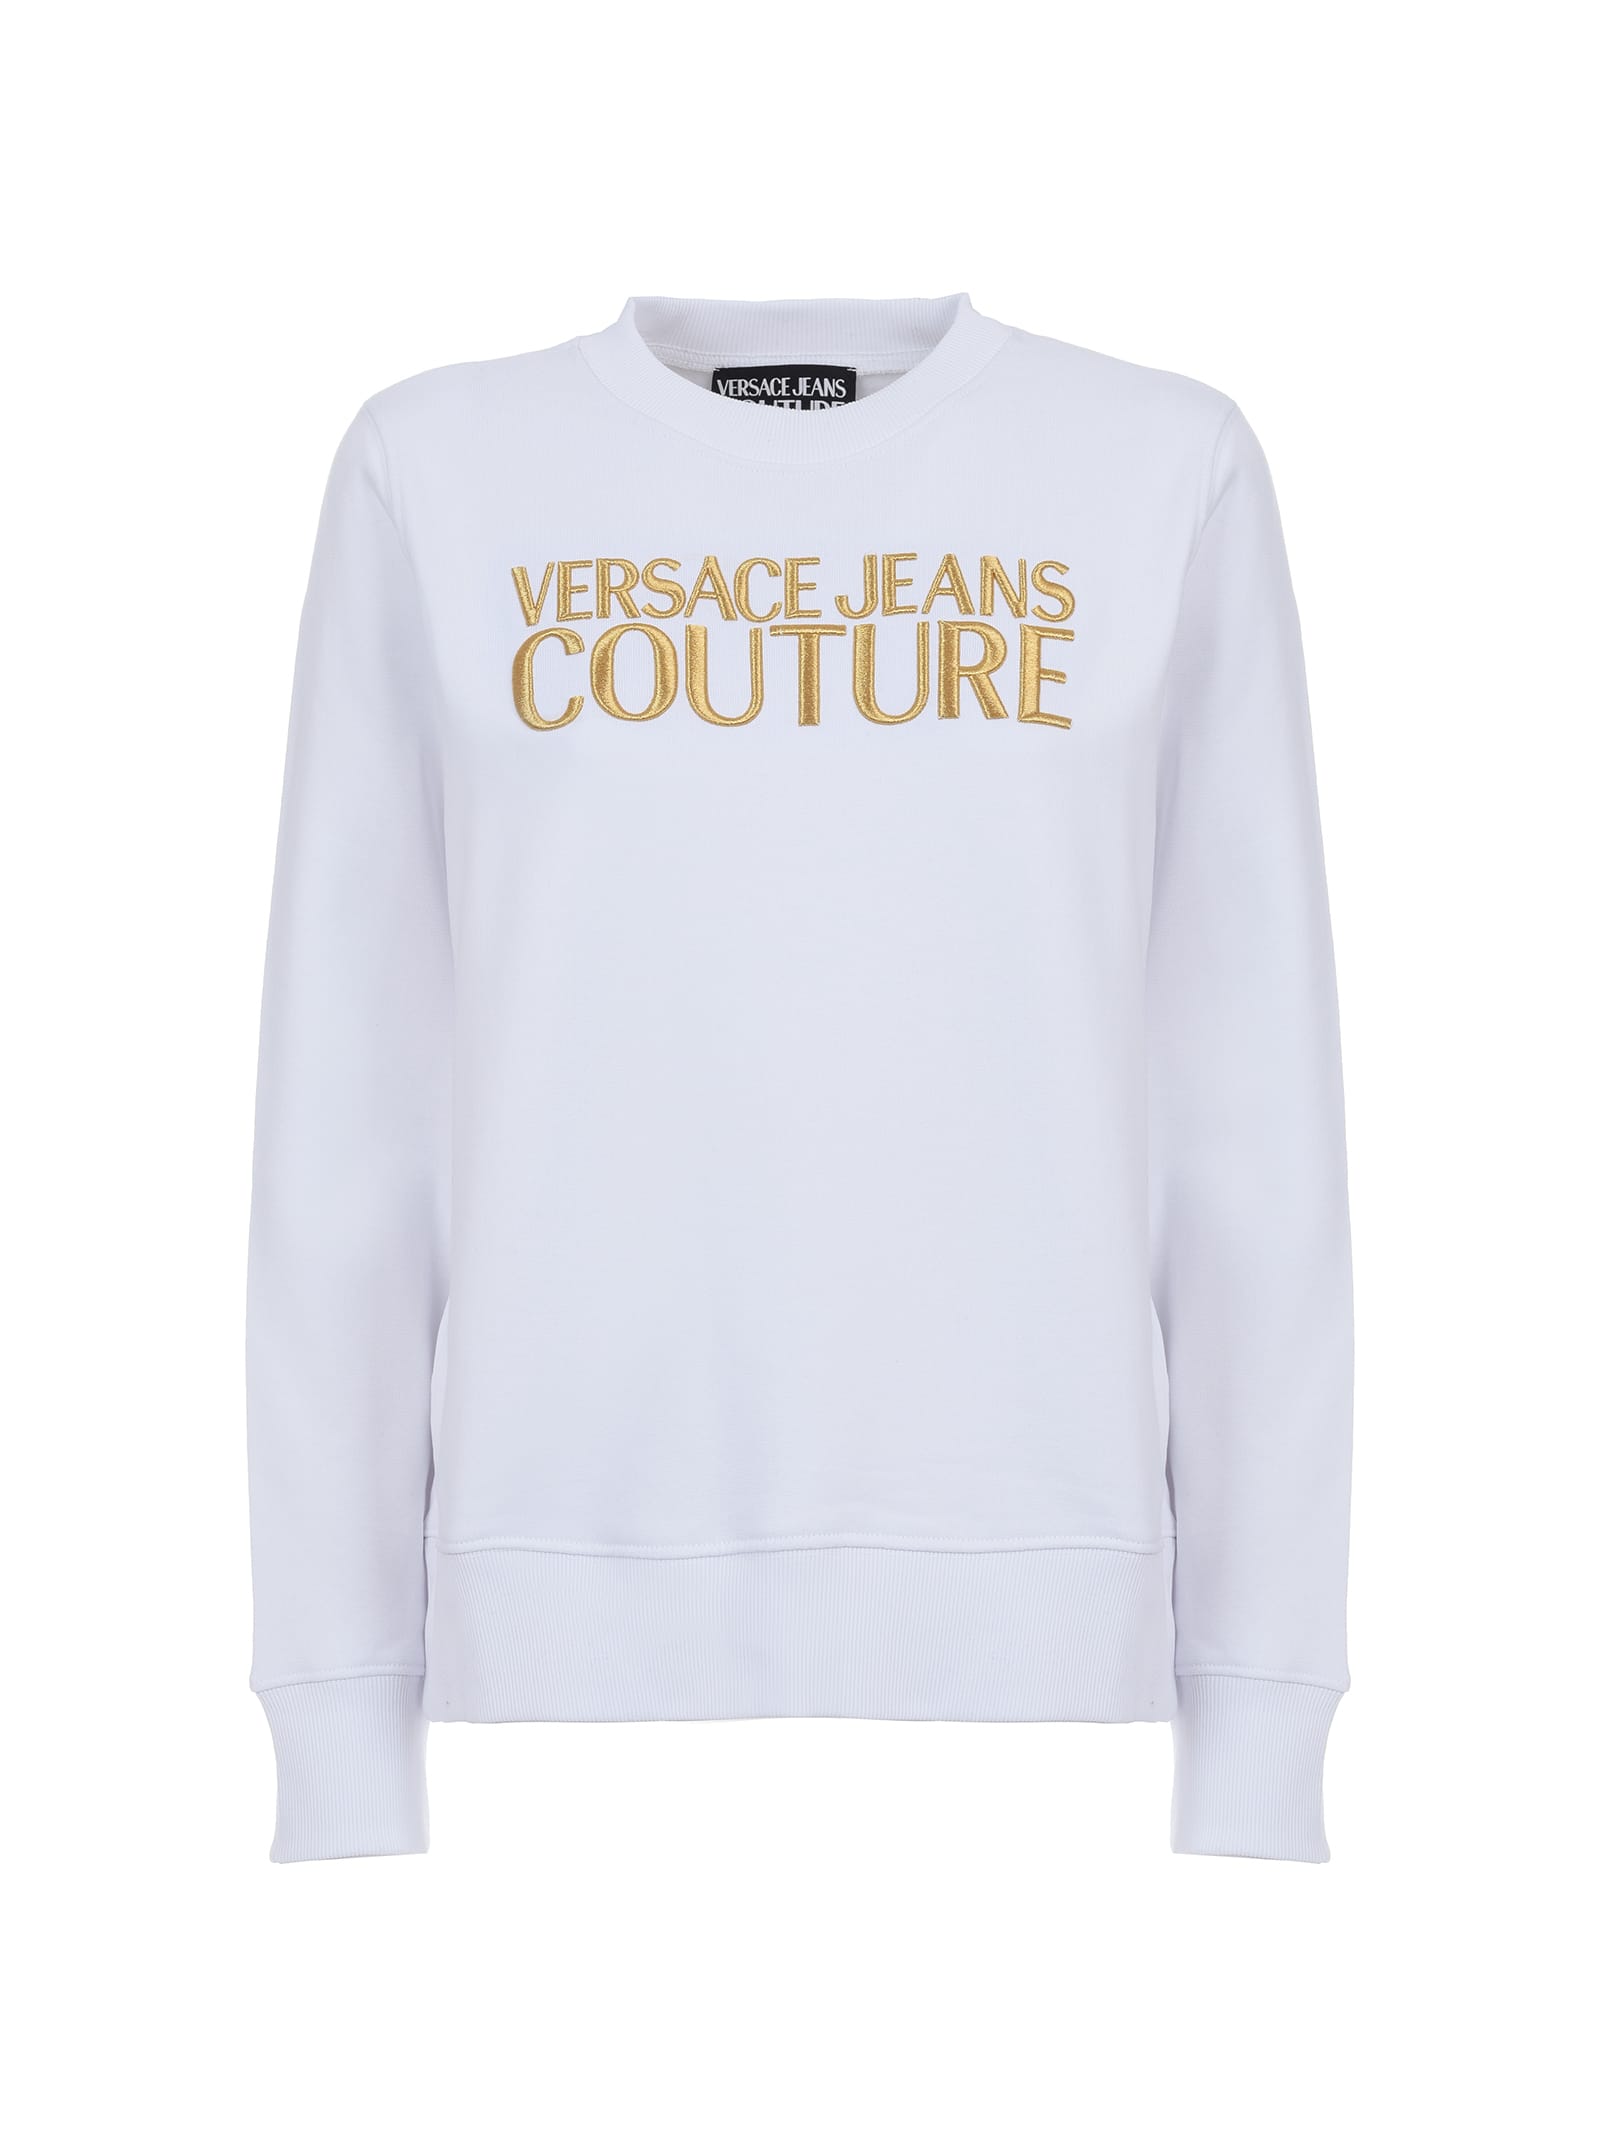 Versace Jeans Couture White Sweatshirt With Gold Emrboidered Logo